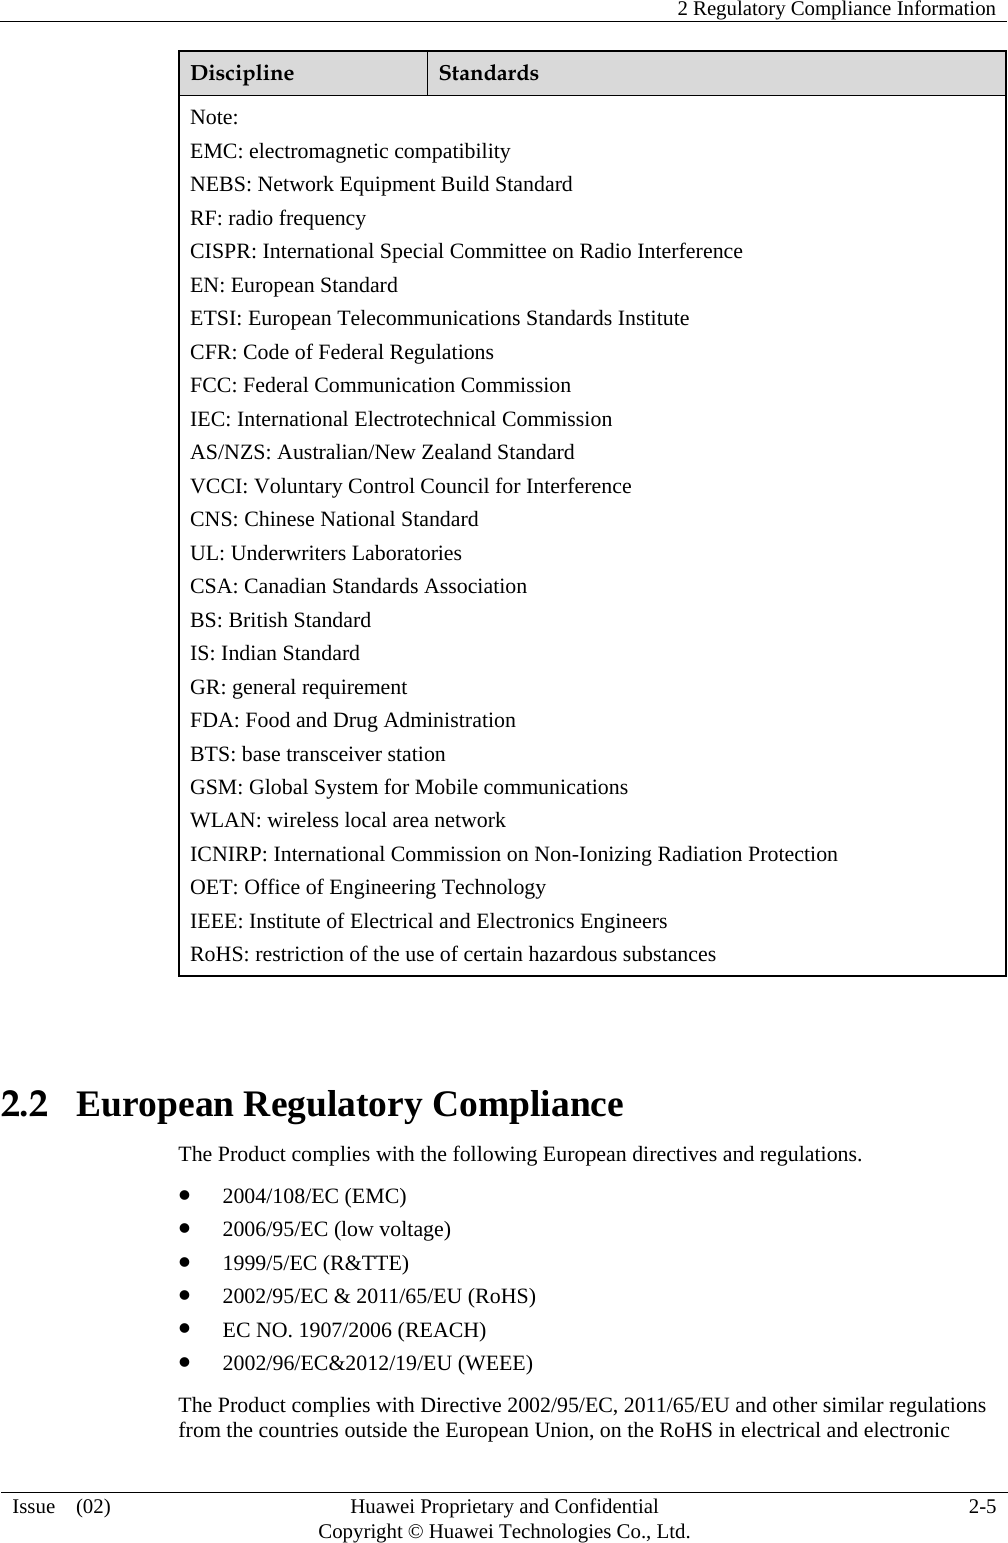    2 Regulatory Compliance Information   Issue  (02)  Huawei Proprietary and Confidential     Copyright © Huawei Technologies Co., Ltd.  2-5  Discipline  Standards Note: EMC: electromagnetic compatibility NEBS: Network Equipment Build Standard RF: radio frequency CISPR: International Special Committee on Radio Interference EN: European Standard ETSI: European Telecommunications Standards Institute CFR: Code of Federal Regulations FCC: Federal Communication Commission IEC: International Electrotechnical Commission AS/NZS: Australian/New Zealand Standard VCCI: Voluntary Control Council for Interference CNS: Chinese National Standard UL: Underwriters Laboratories CSA: Canadian Standards Association BS: British Standard IS: Indian Standard GR: general requirement FDA: Food and Drug Administration BTS: base transceiver station GSM: Global System for Mobile communications WLAN: wireless local area network ICNIRP: International Commission on Non-Ionizing Radiation Protection OET: Office of Engineering Technology IEEE: Institute of Electrical and Electronics Engineers RoHS: restriction of the use of certain hazardous substances  2.2   European Regulatory Compliance The Product complies with the following European directives and regulations.  2004/108/EC (EMC)  2006/95/EC (low voltage)  1999/5/EC (R&amp;TTE)  2002/95/EC &amp; 2011/65/EU (RoHS)  EC NO. 1907/2006 (REACH)  2002/96/EC&amp;2012/19/EU (WEEE) The Product complies with Directive 2002/95/EC, 2011/65/EU and other similar regulations from the countries outside the European Union, on the RoHS in electrical and electronic 